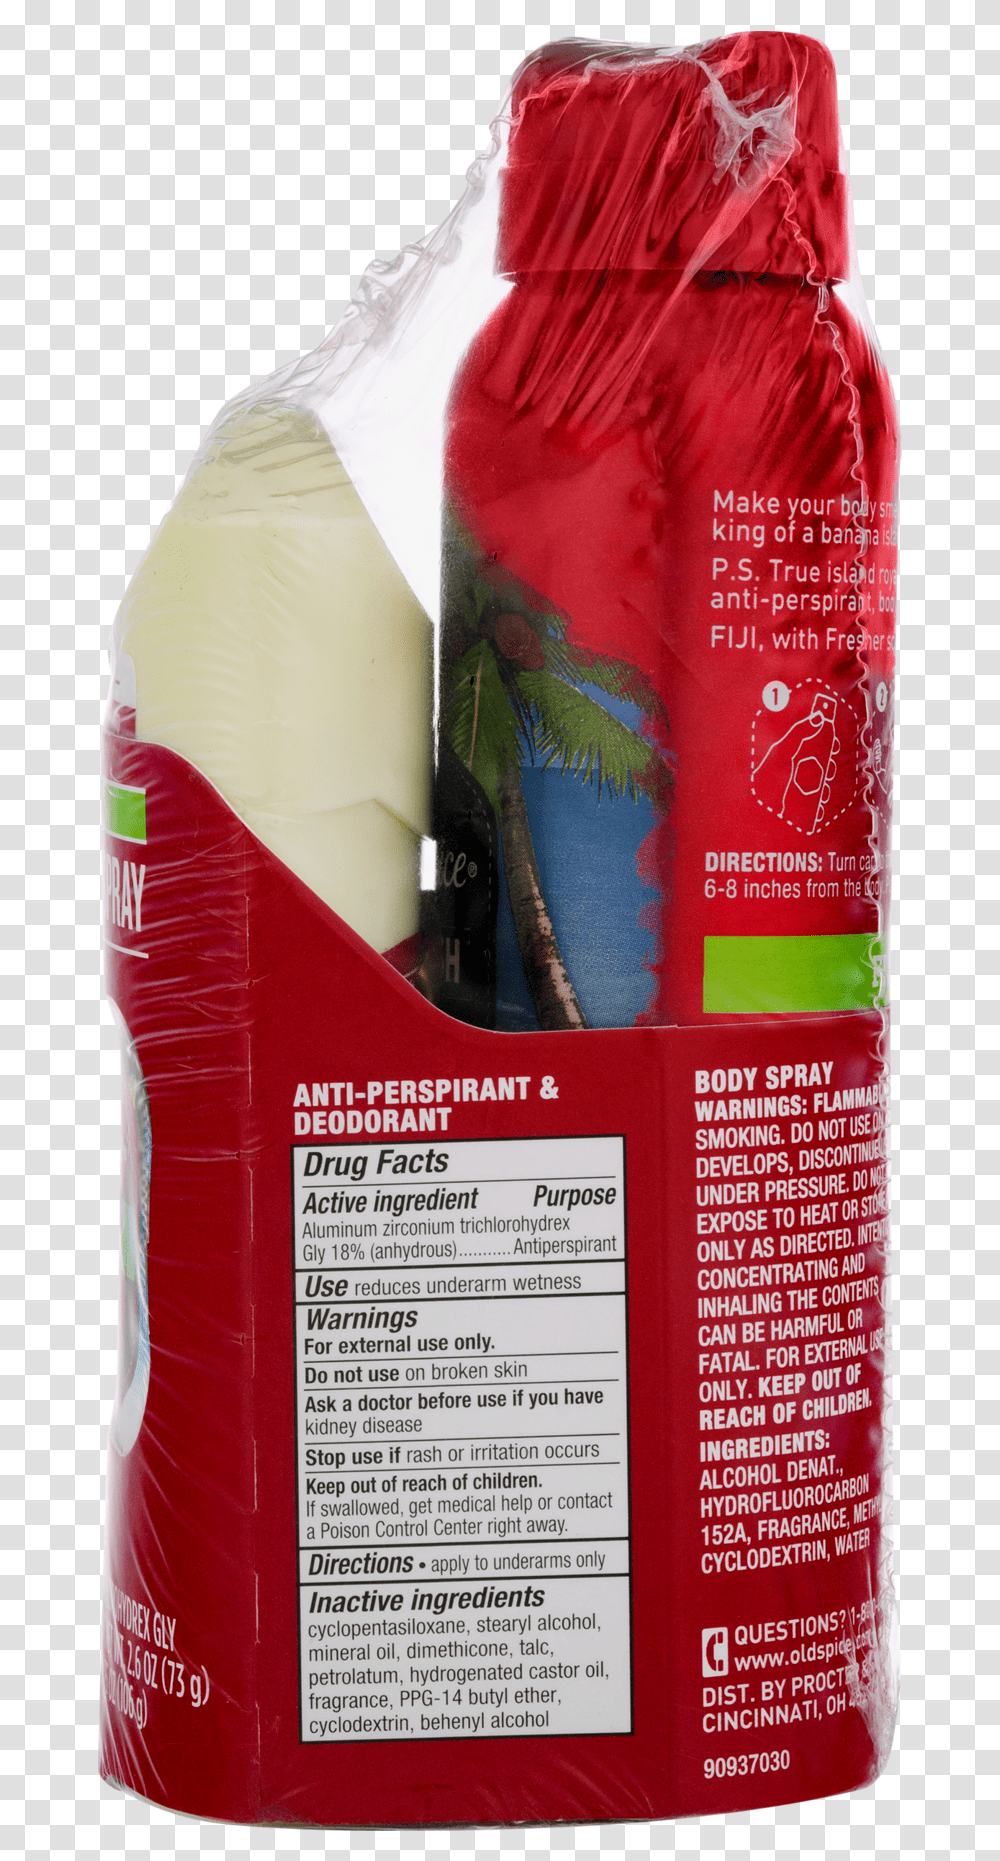 Old Spice Fuji With Palm Tree Stick Body Spray 2 Pc Quilt, Food, Bottle, Ice Pop Transparent Png